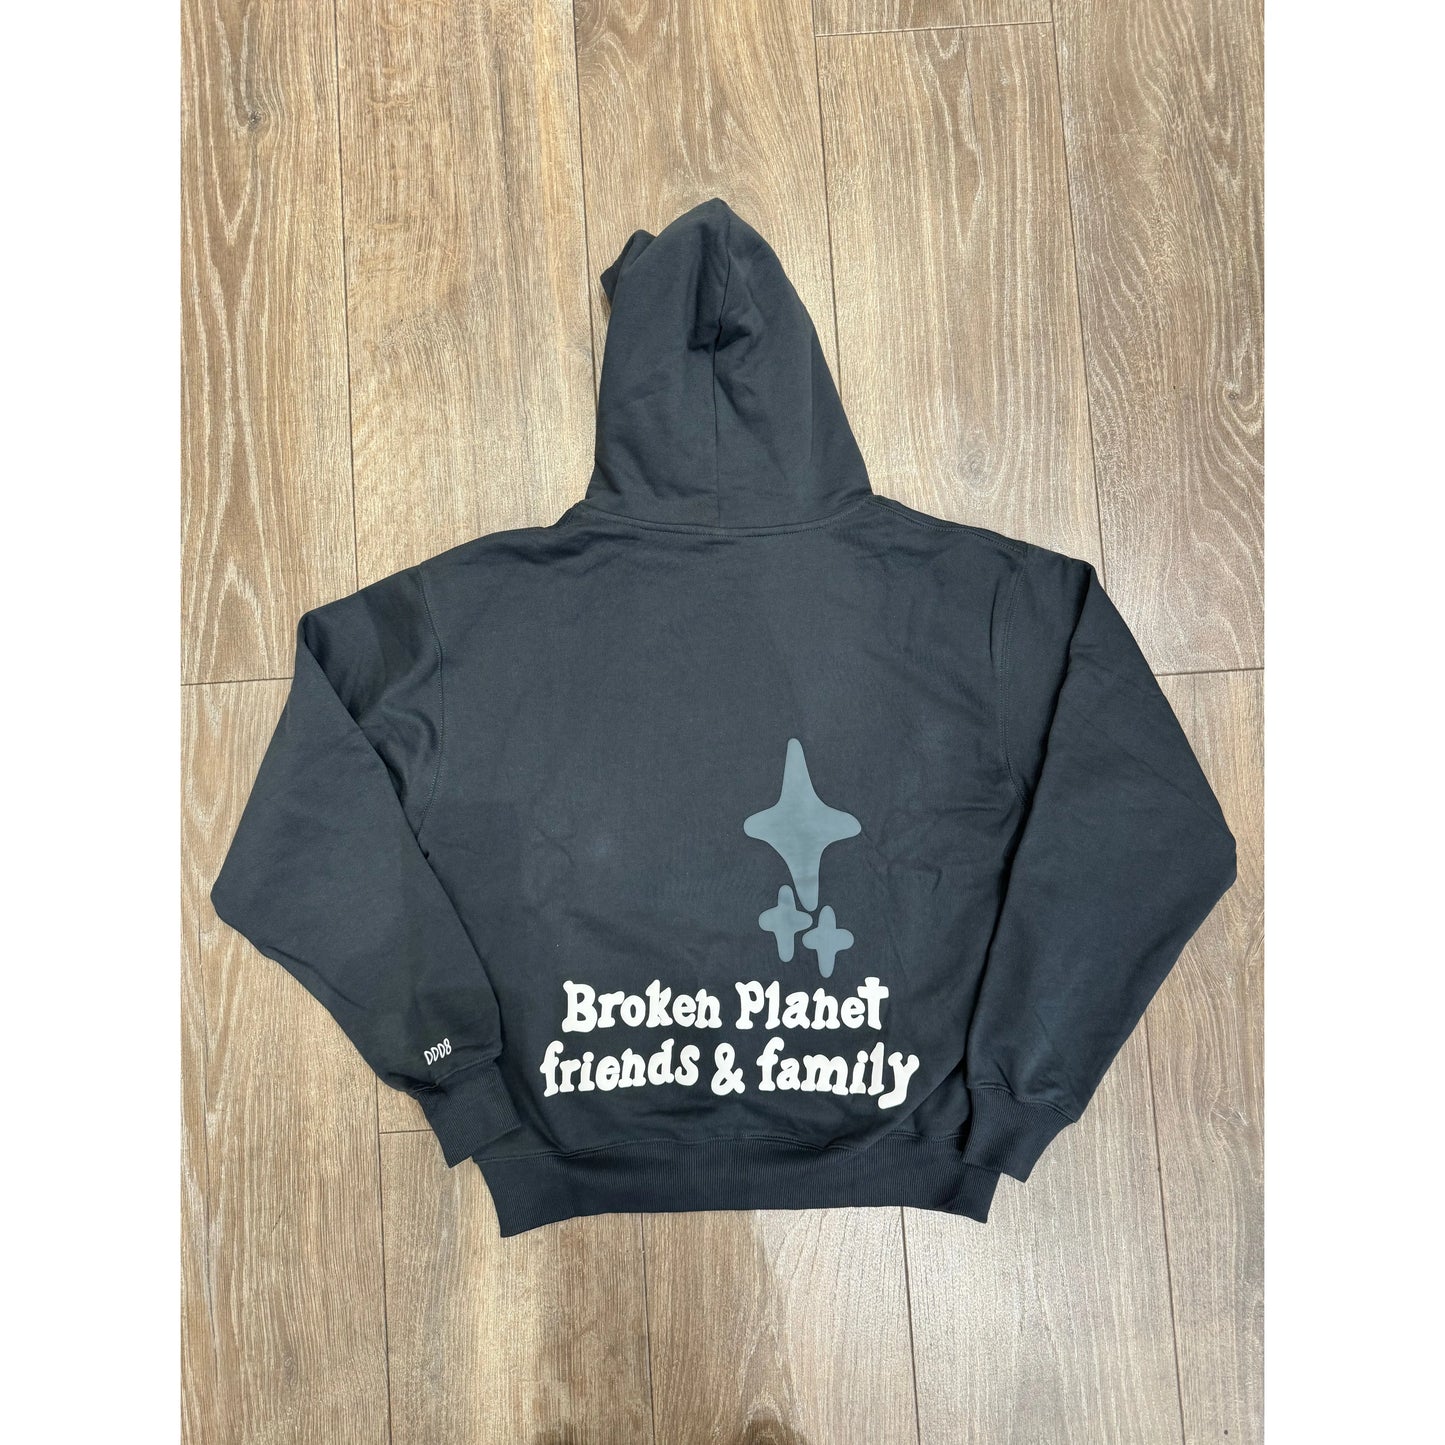 Broken Planet Market Alternate Dimensions Hoodie (Friends and Family) by Broken Planet Market from £280.00